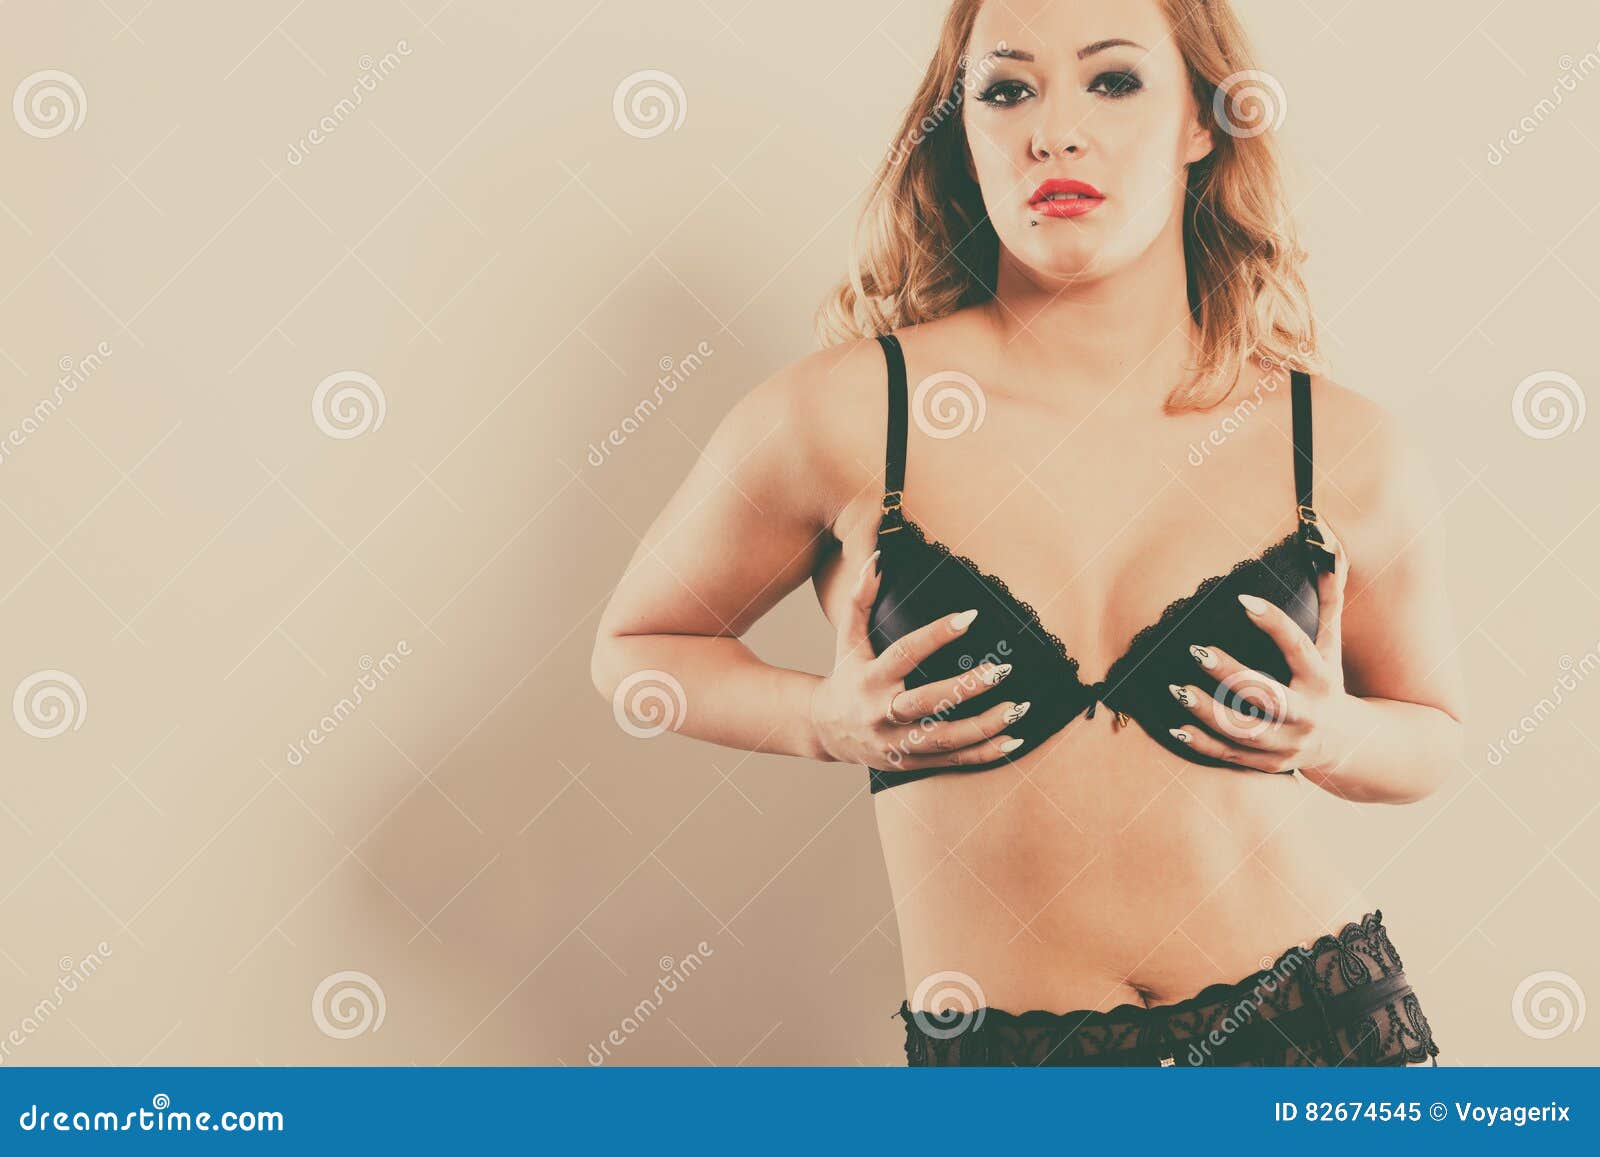 https://thumbs.dreamstime.com/z/woman-holding-touching-her-breast-sexiness-sensuality-young-attractive-bra-seductive-lady-hands-chest-black-brassiere-82674545.jpg